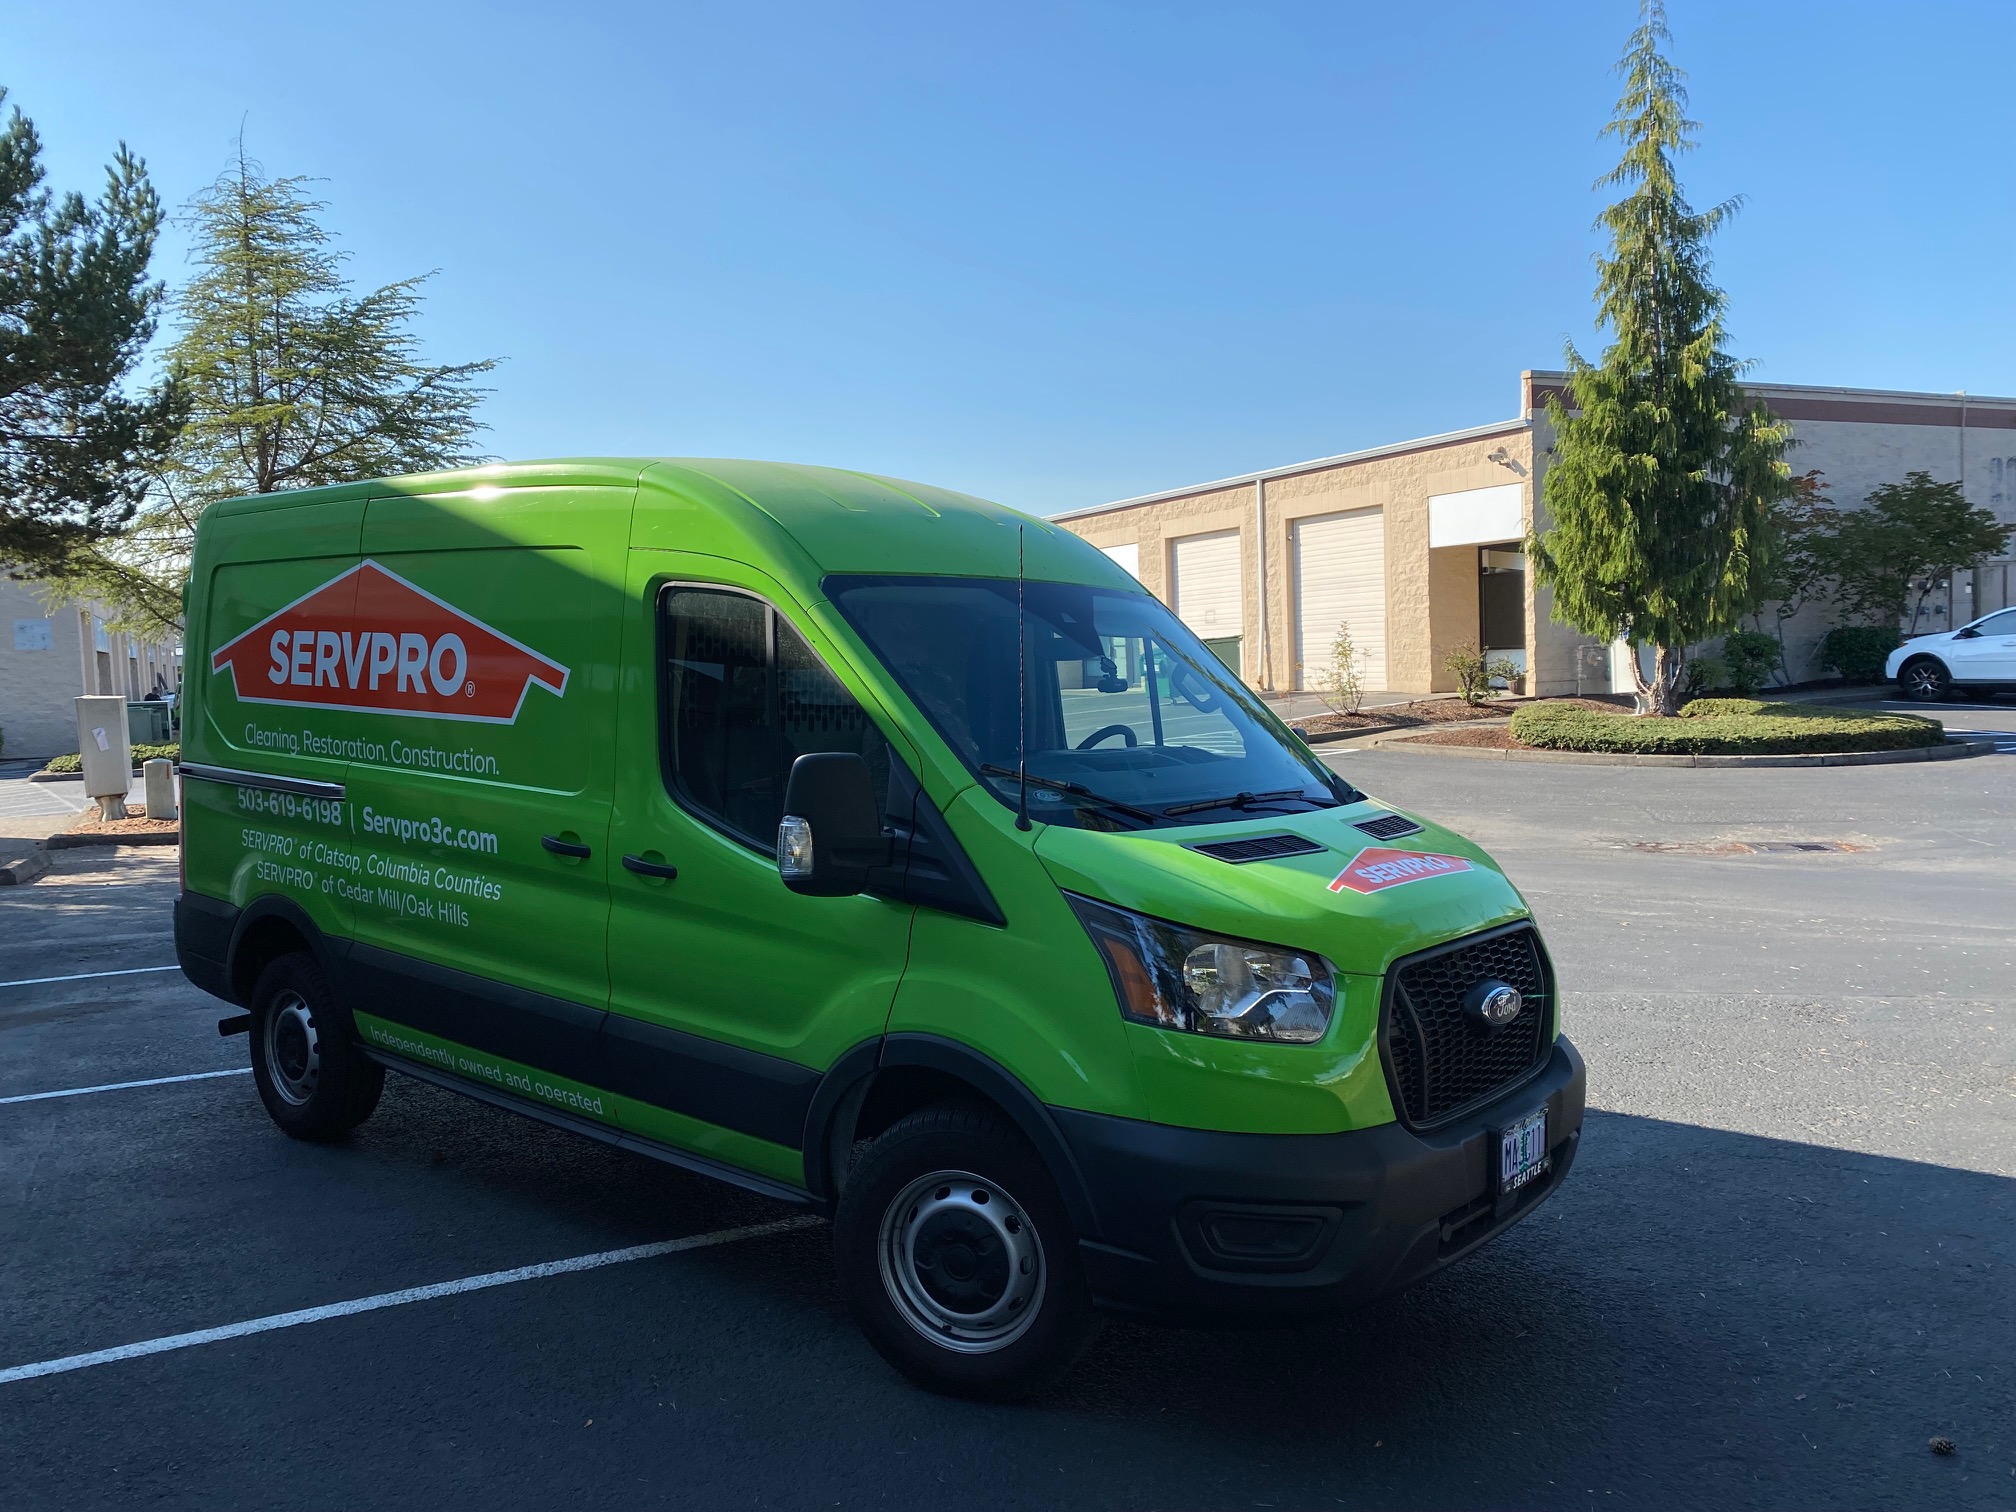 Here is one of SERVPRO of Cedar Mill/Oak Hills newest vans. You might see us driving around town helping your neighbors - and we are available 24/7 for emergencies as well.